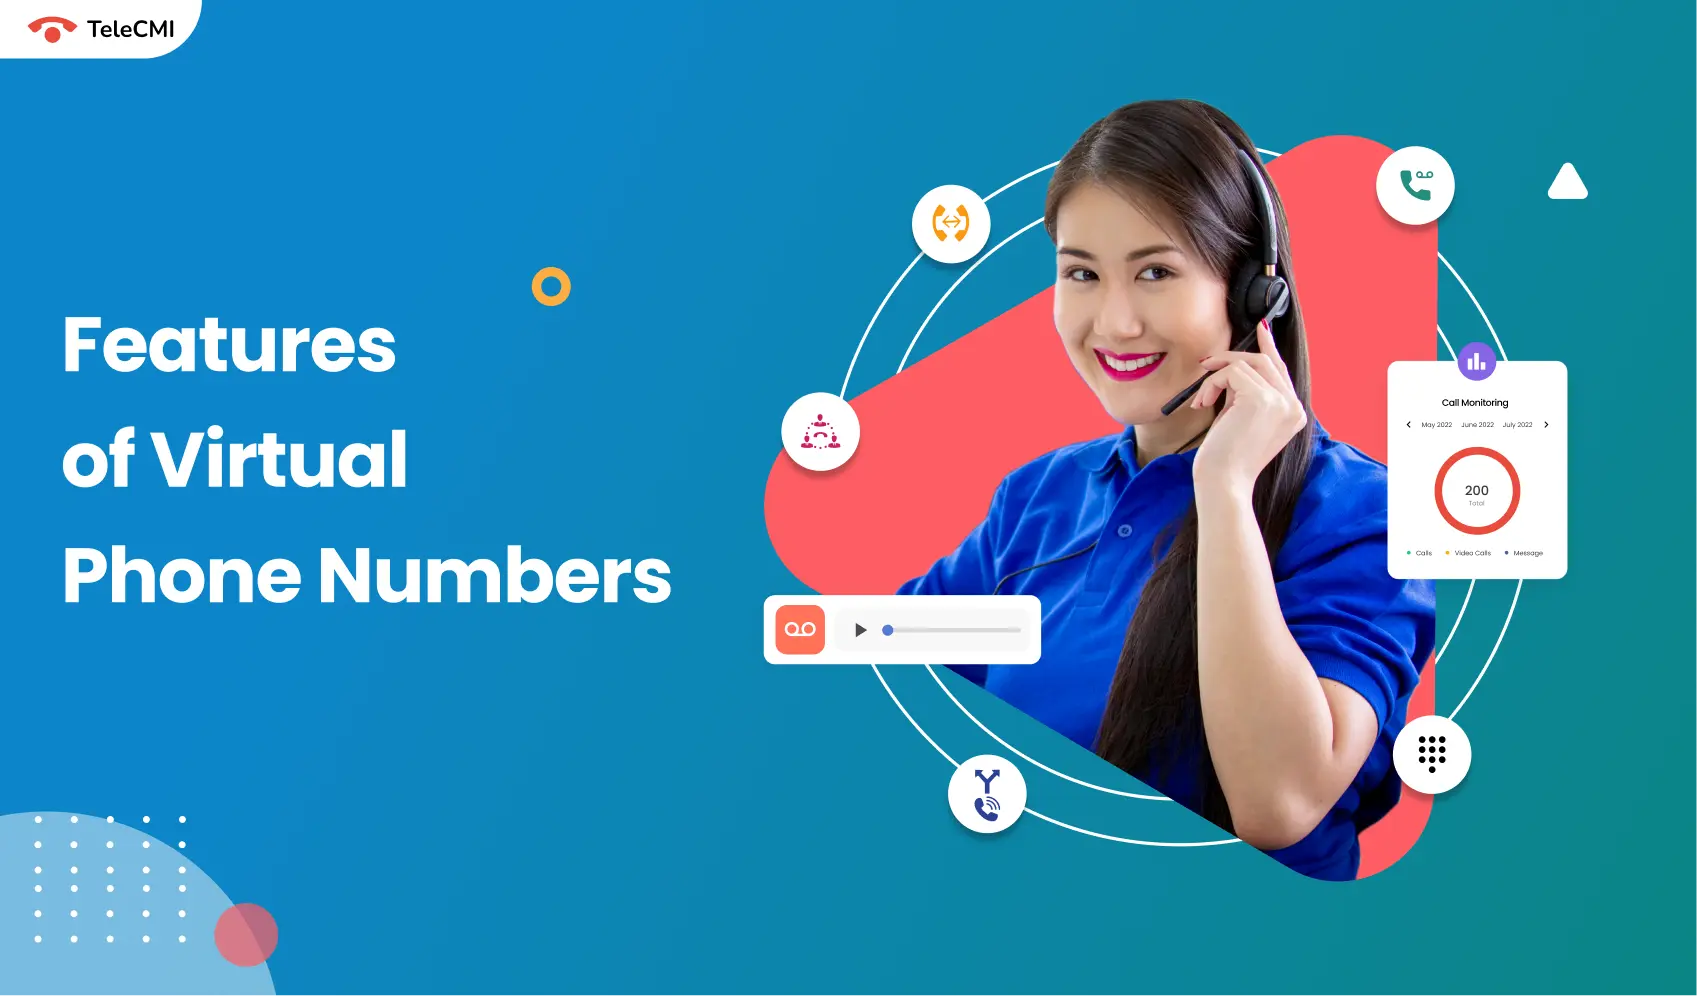 Features of Virtual Phone Numbers